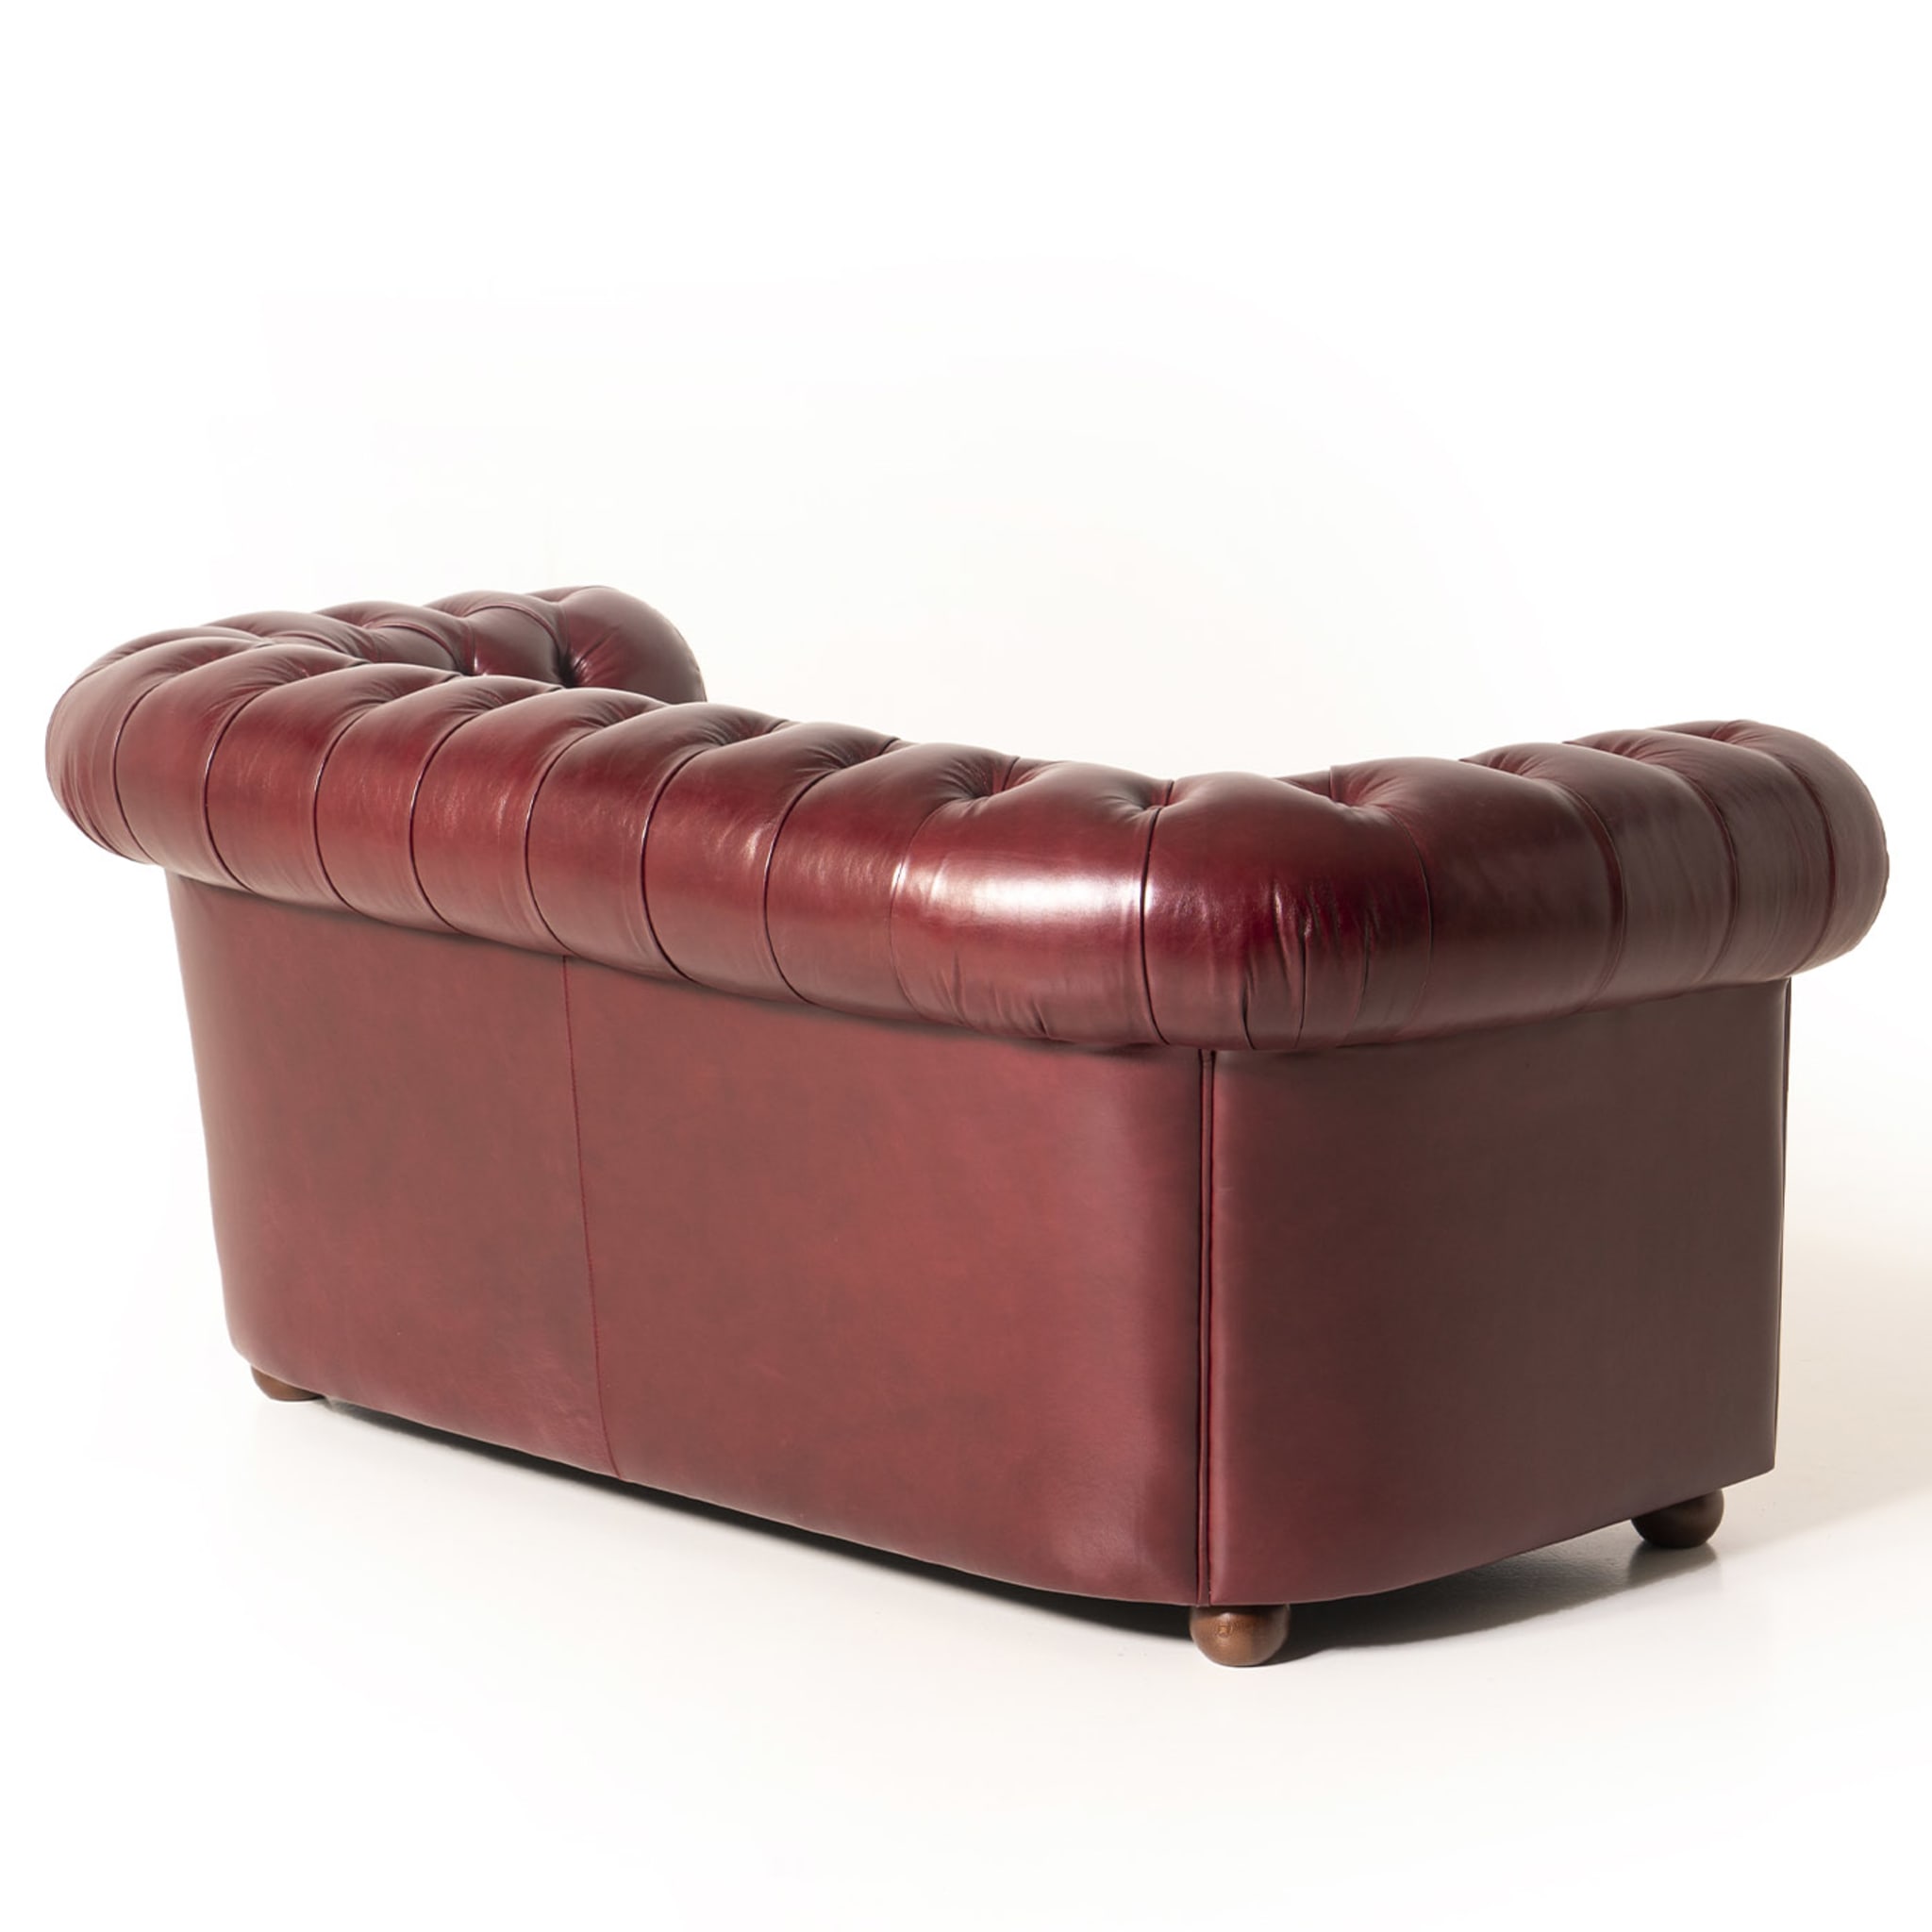 Chesterfield Bordeaux Leather Sofa - Alternative view 1